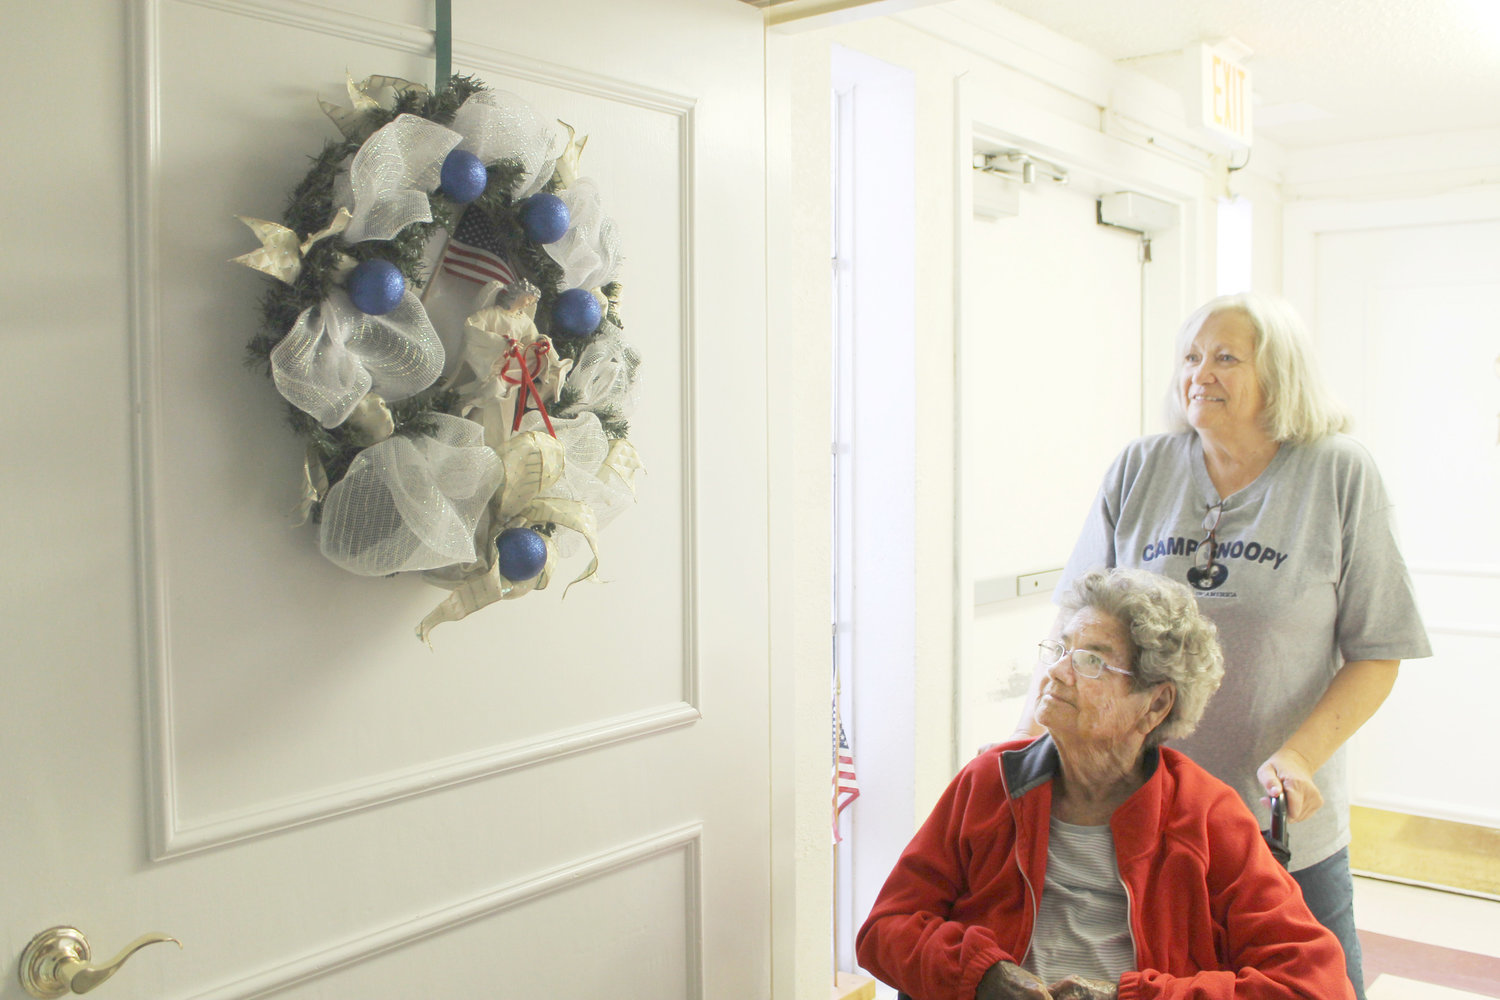 Patterson gave Mary Winkle “a lift” to her room in her wheelchair where Winkle admires the wreath given to her by the Fannie Marchman Garden Club.